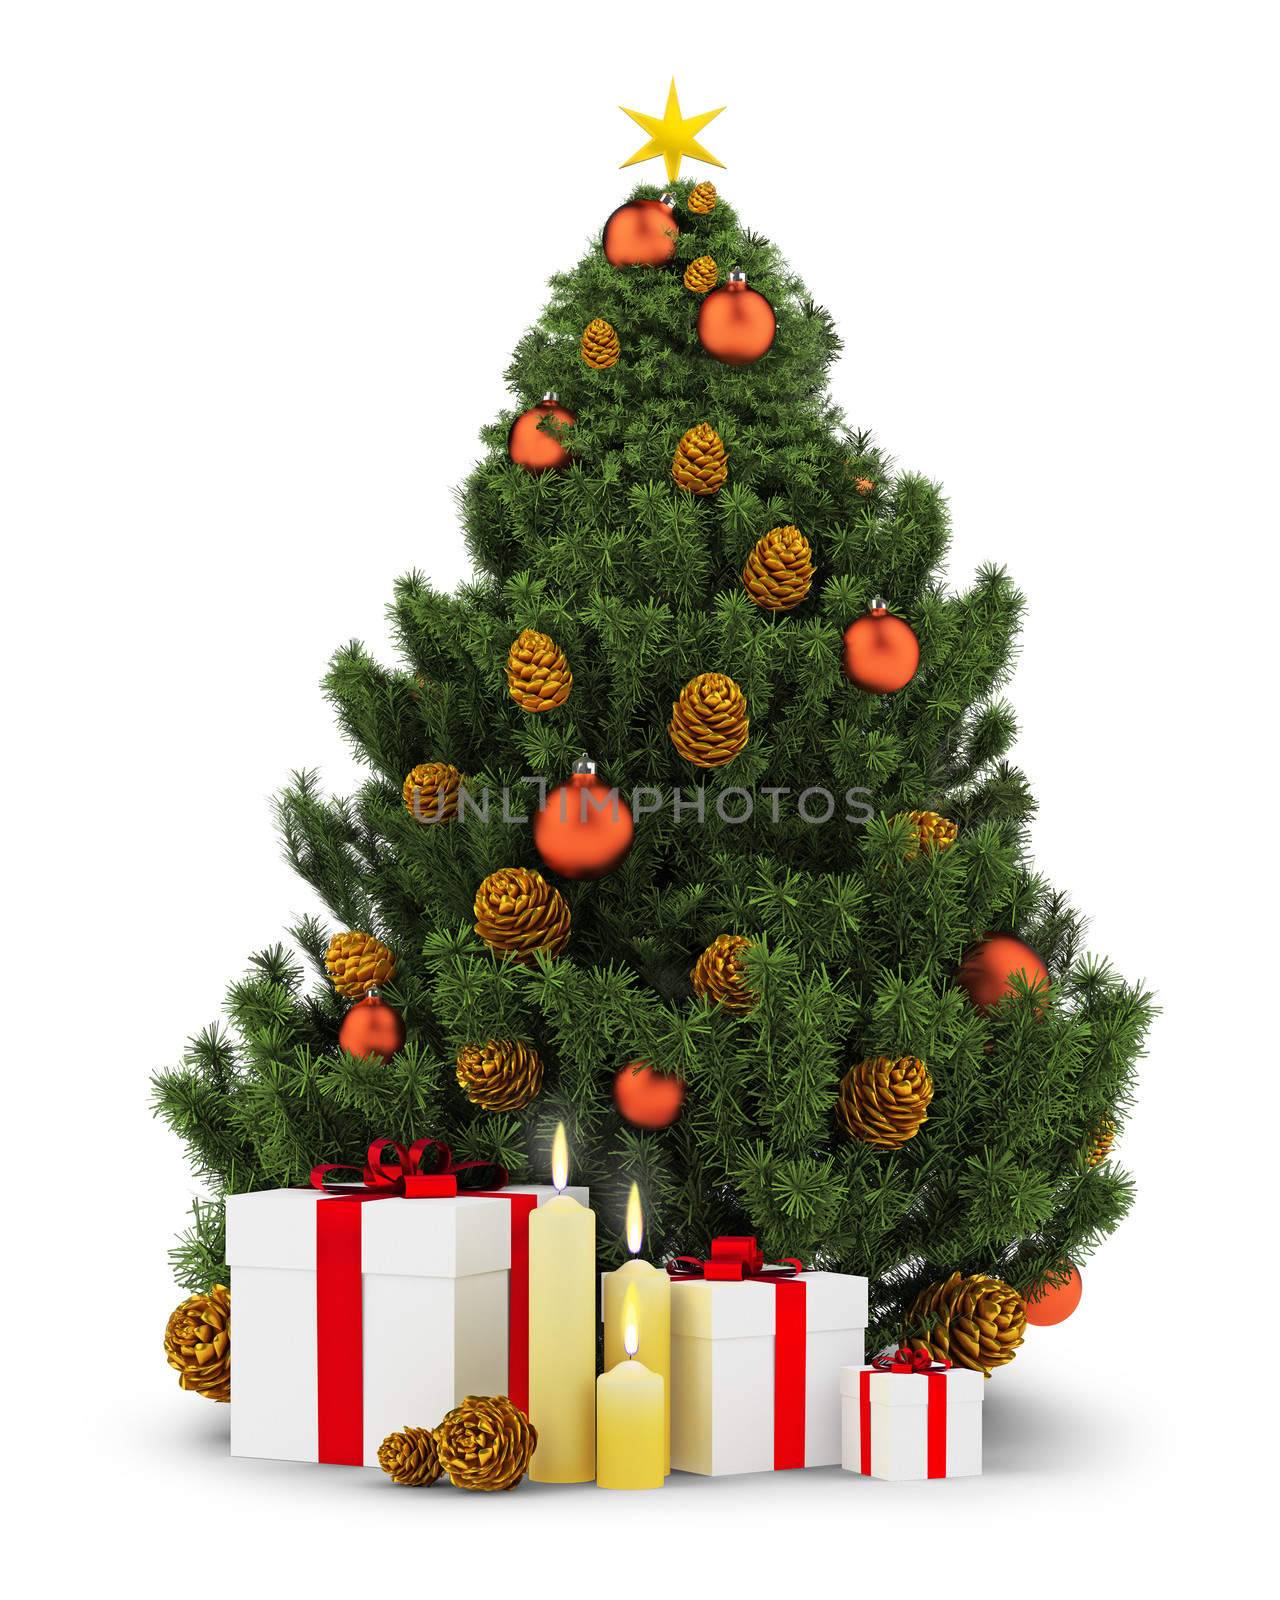 New Year tree with gifts, spheres, candles and gold cones on the isolated white background